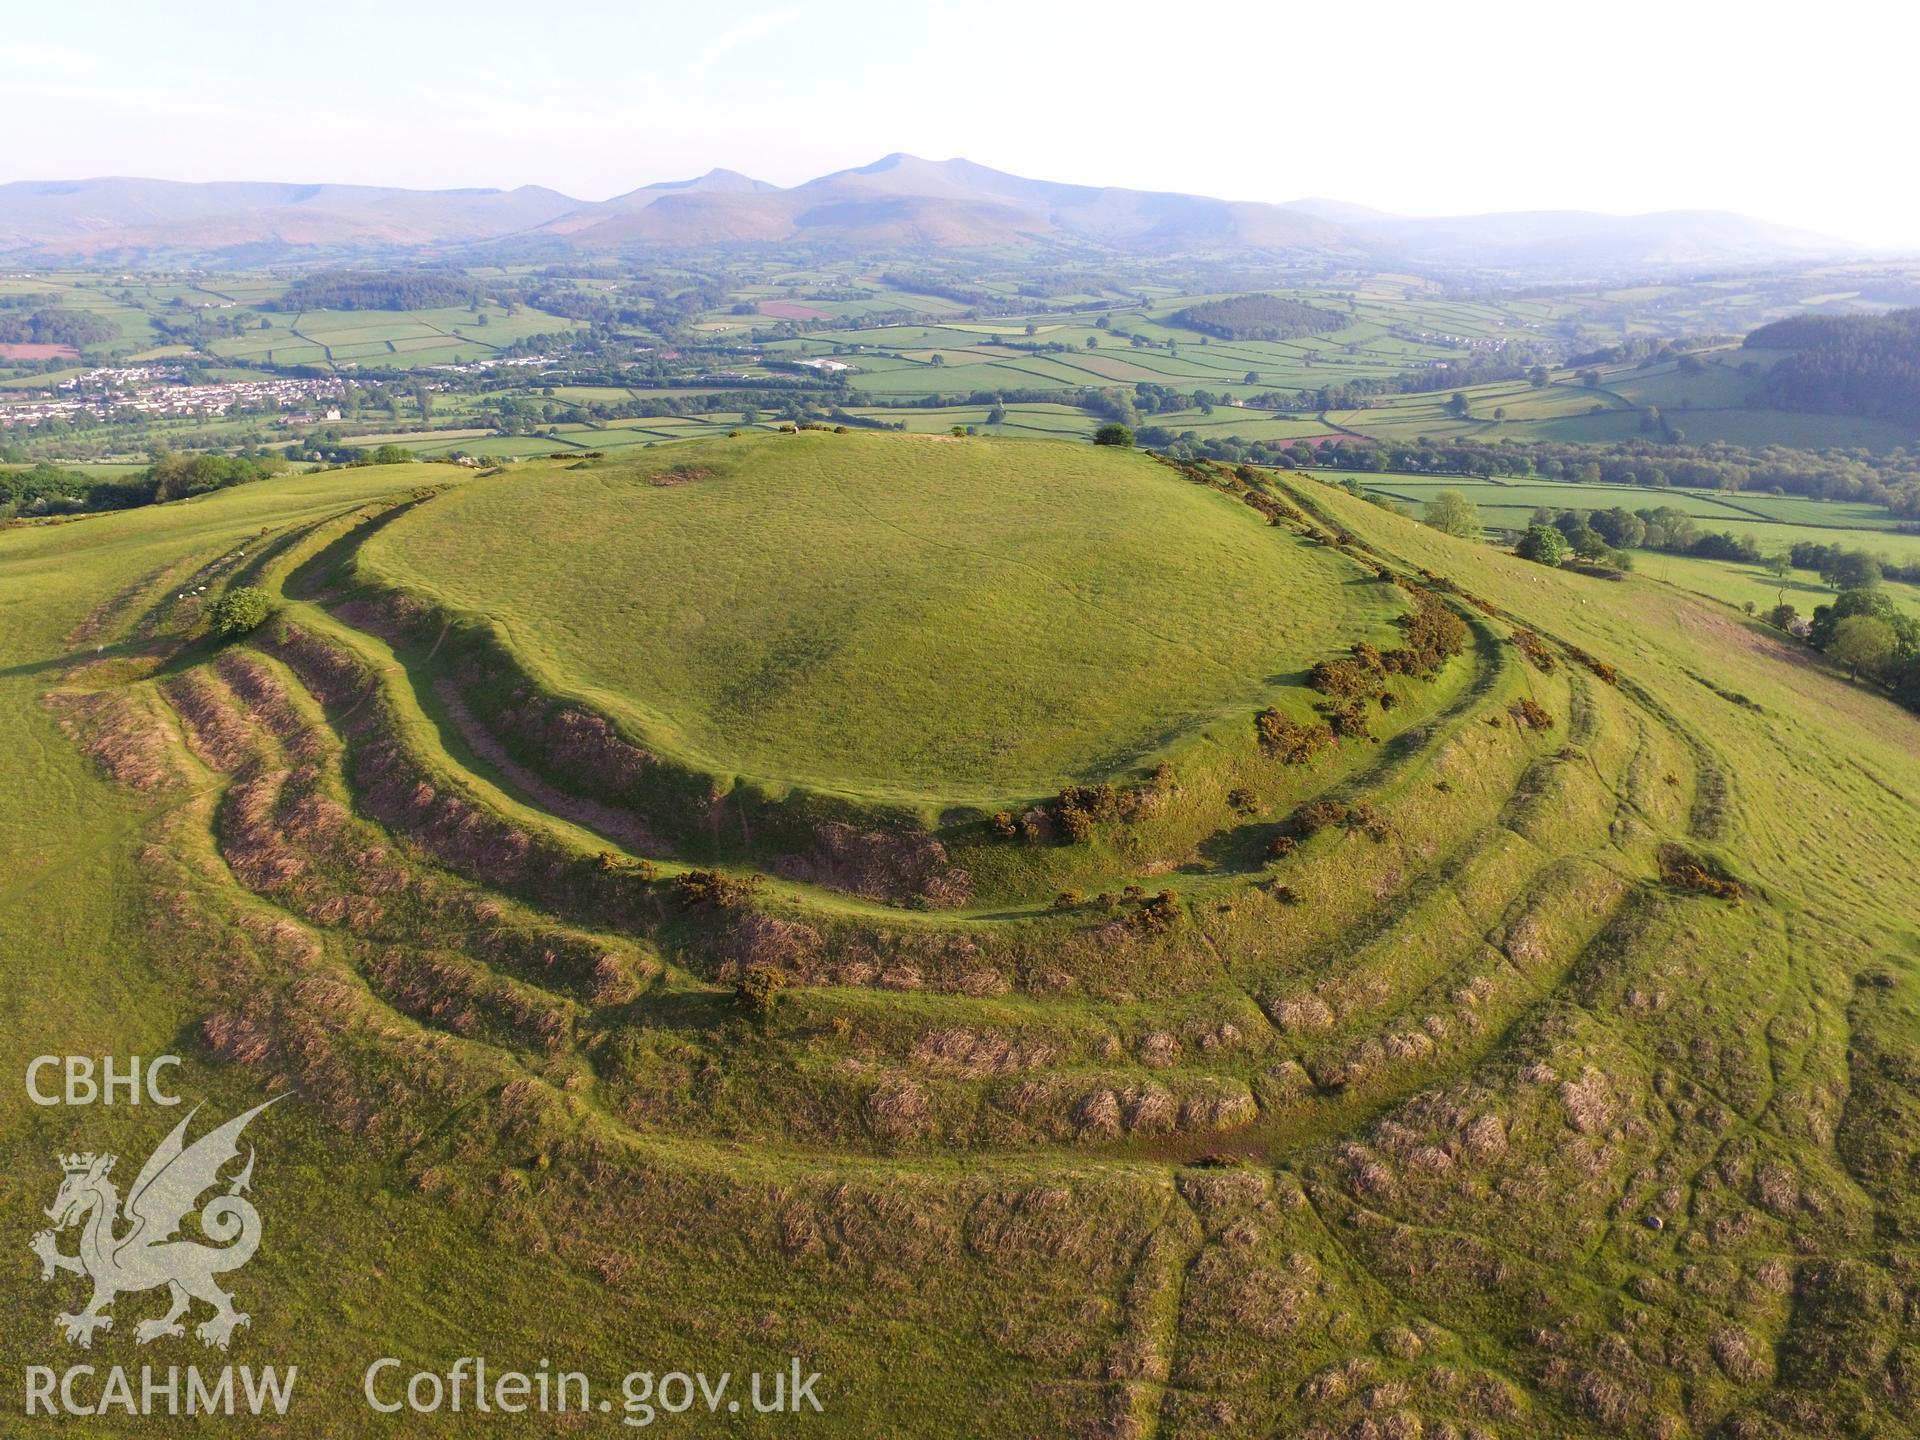 Colour aerial photo showing Pen y Crug, taken by Paul R. Davis,  29th May 2016.